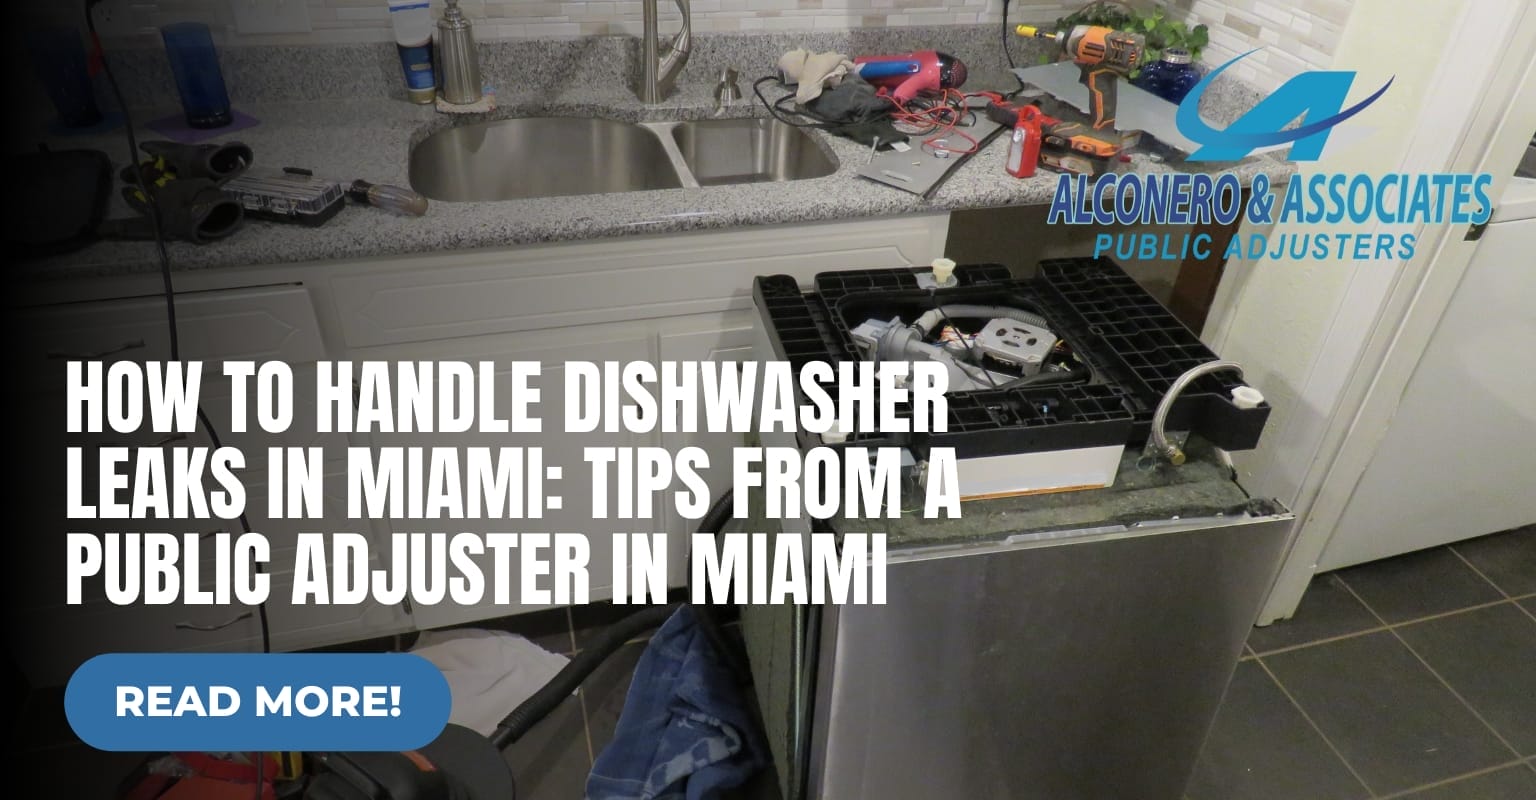 How to Handle Dishwasher Leaks in Miami: Tips from a Public Adjuster in Miami